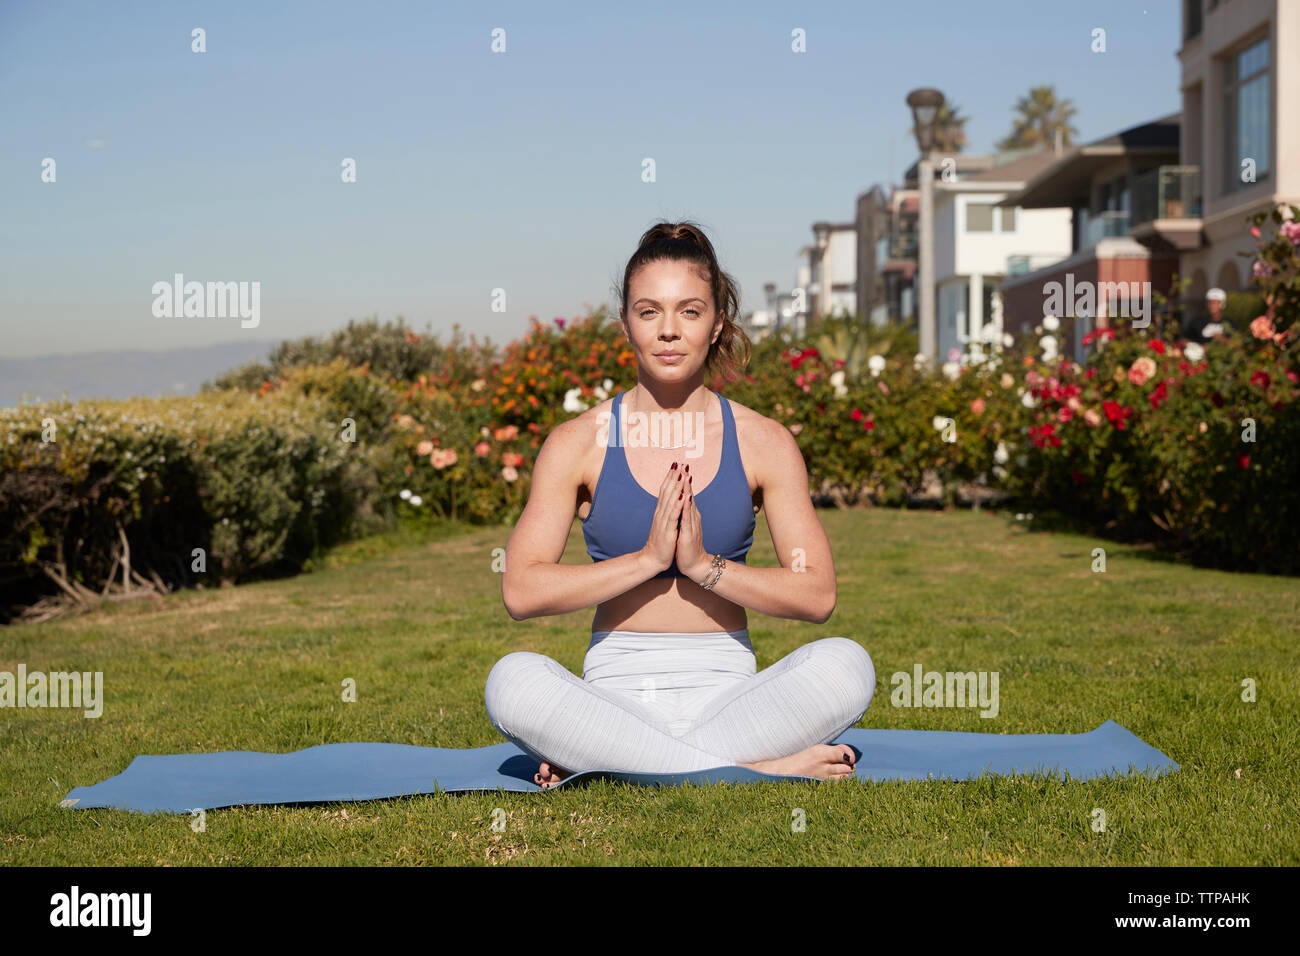 Portrait of woman with hands clasped and cross-legged meditating on exercise mat Stock Photo